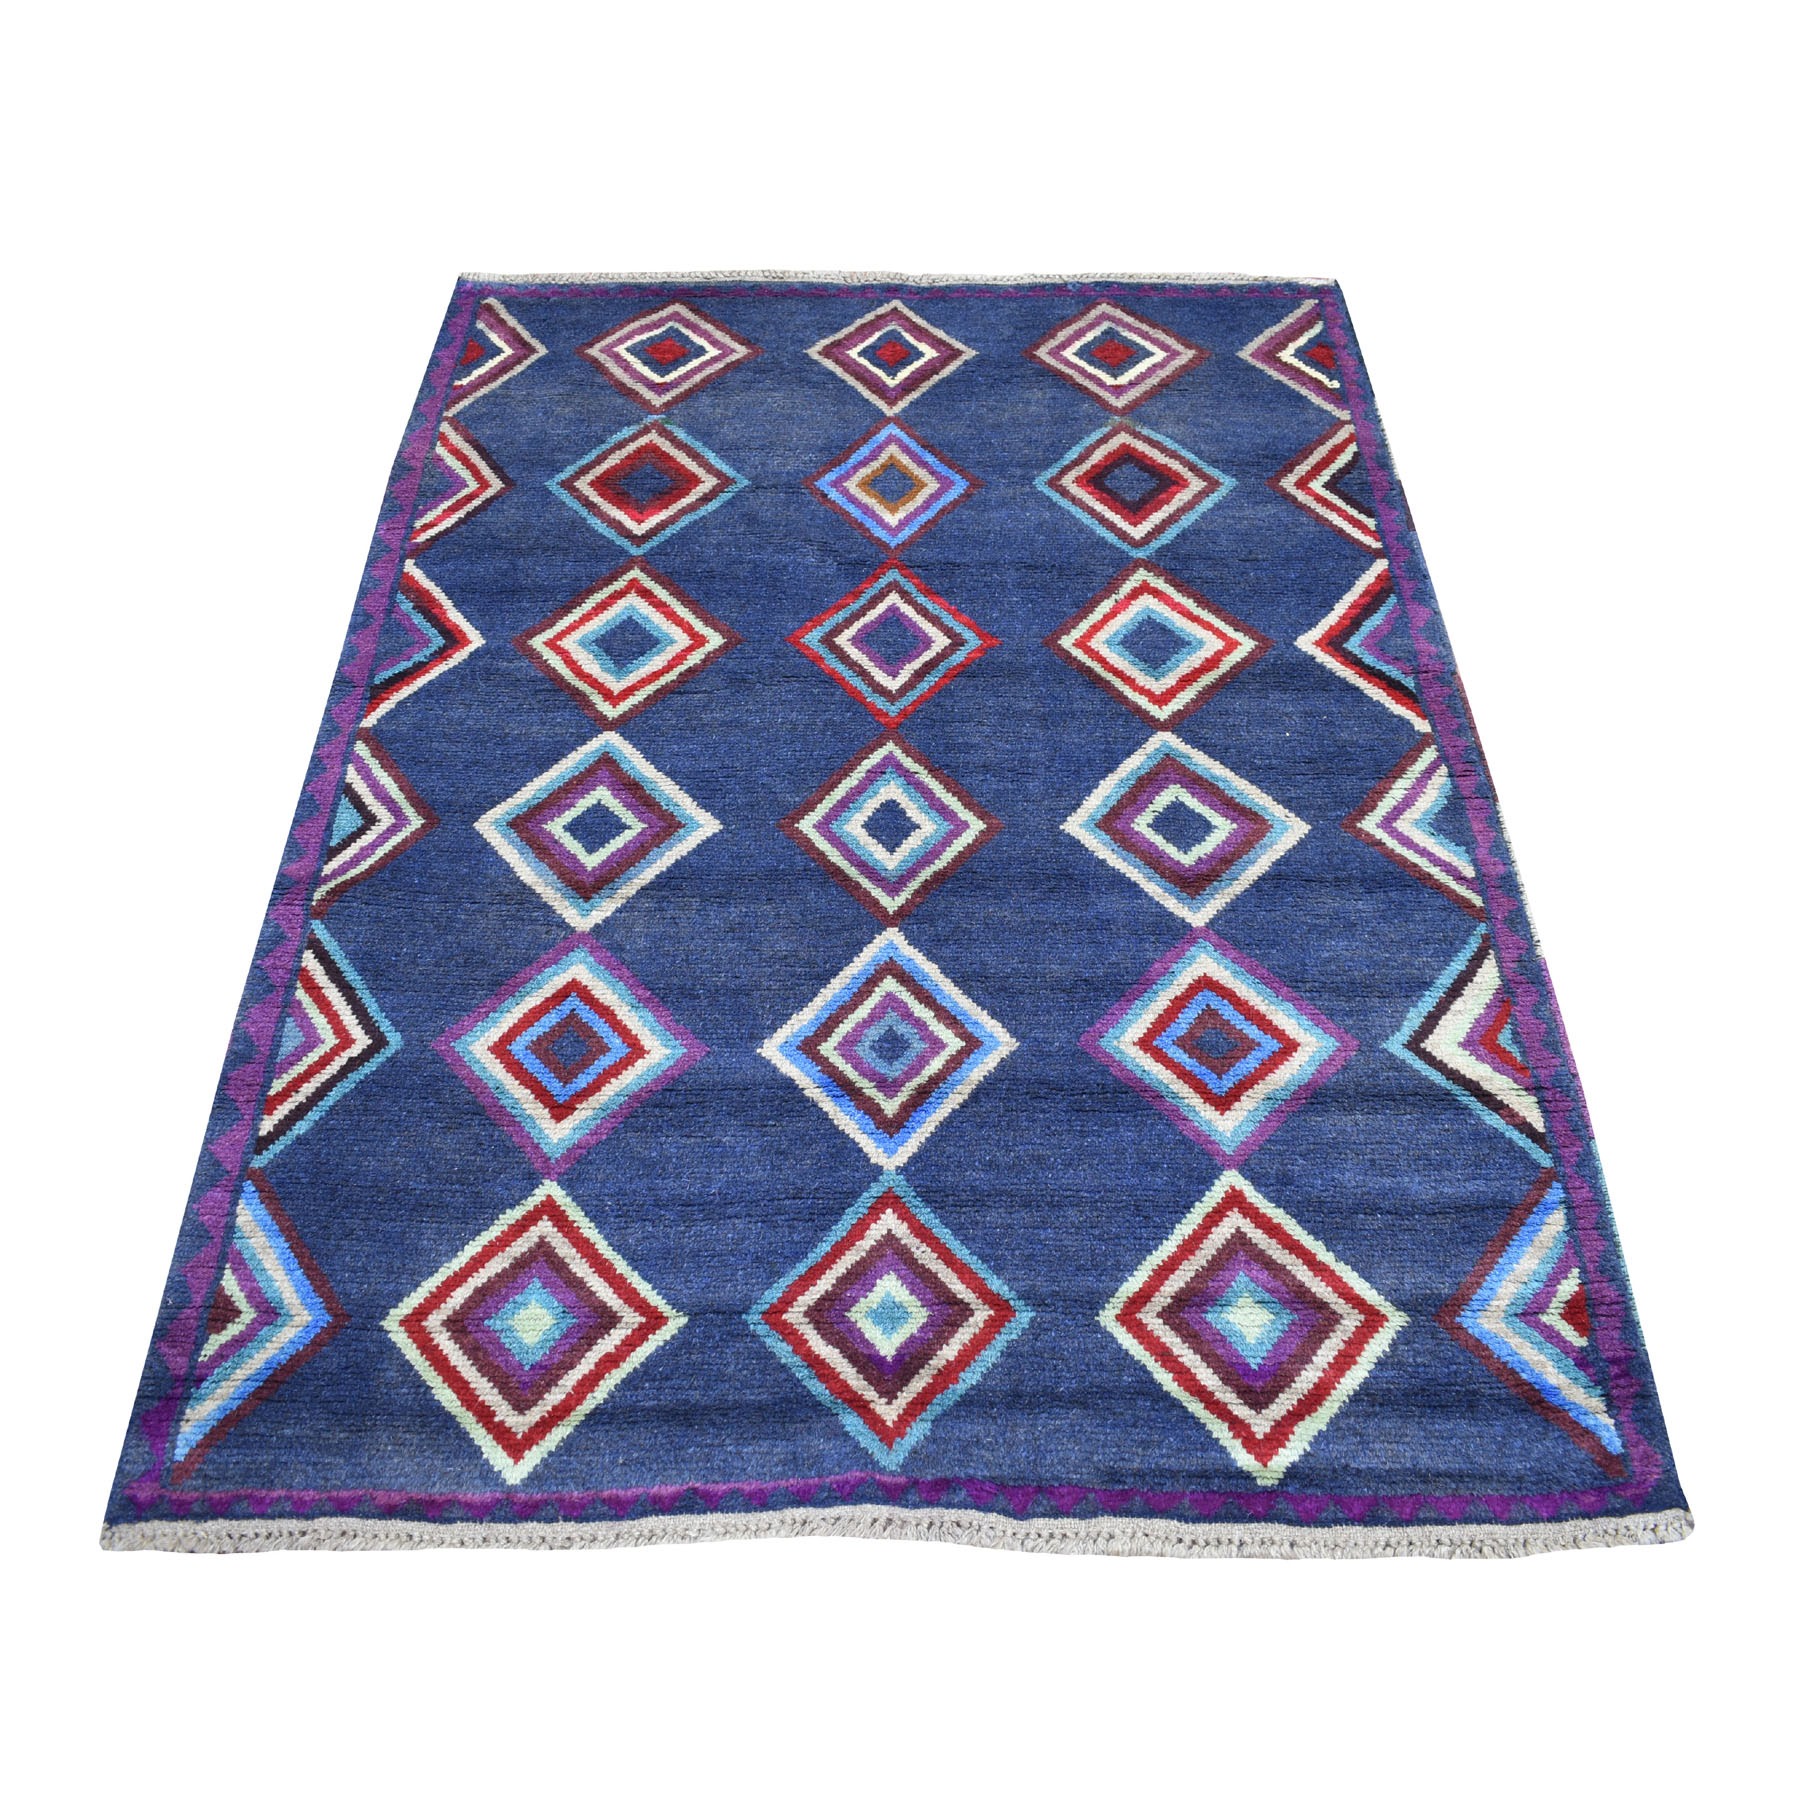 4'2"X5'7" Blue Colorful Afghan Baluch Geometric Design Hand Knotted Pure Wool Oriental Rug moaecc09